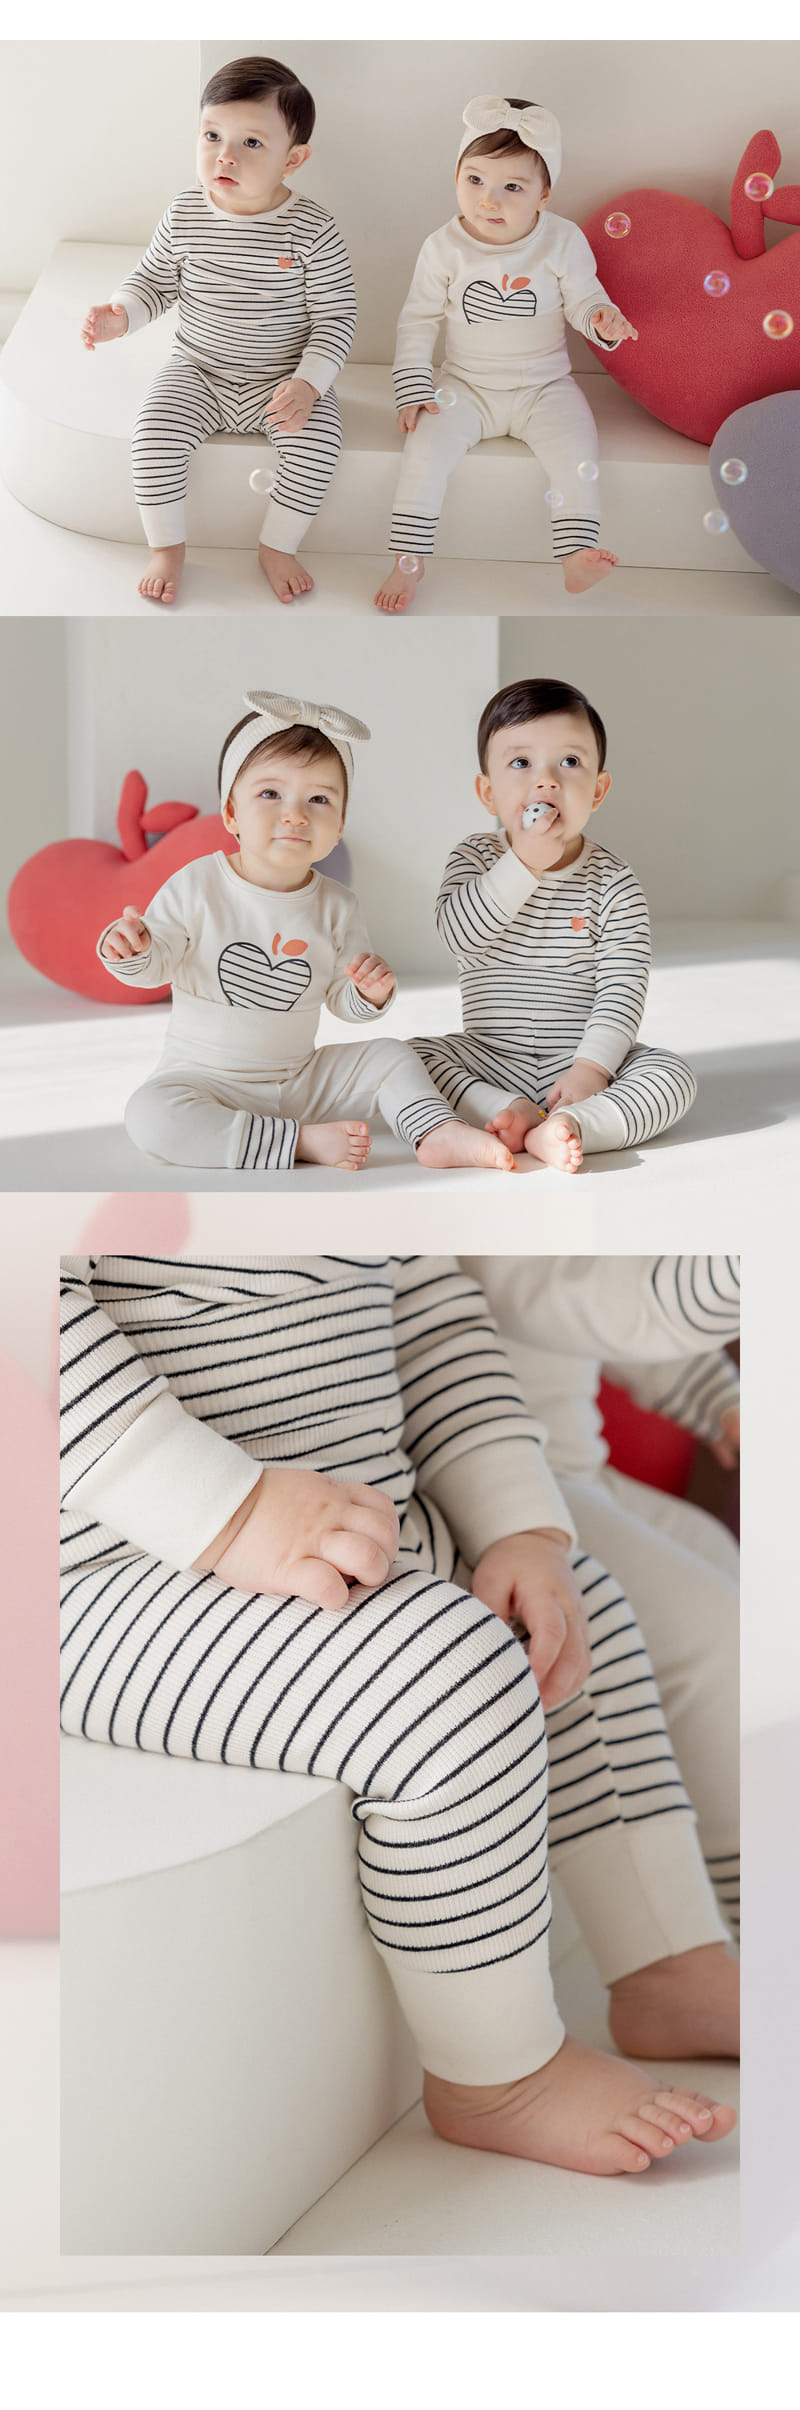 Kids Clara - Korean Baby Fashion - #babyclothing - Ylang Compy Belly Baby Easy Wear - 6